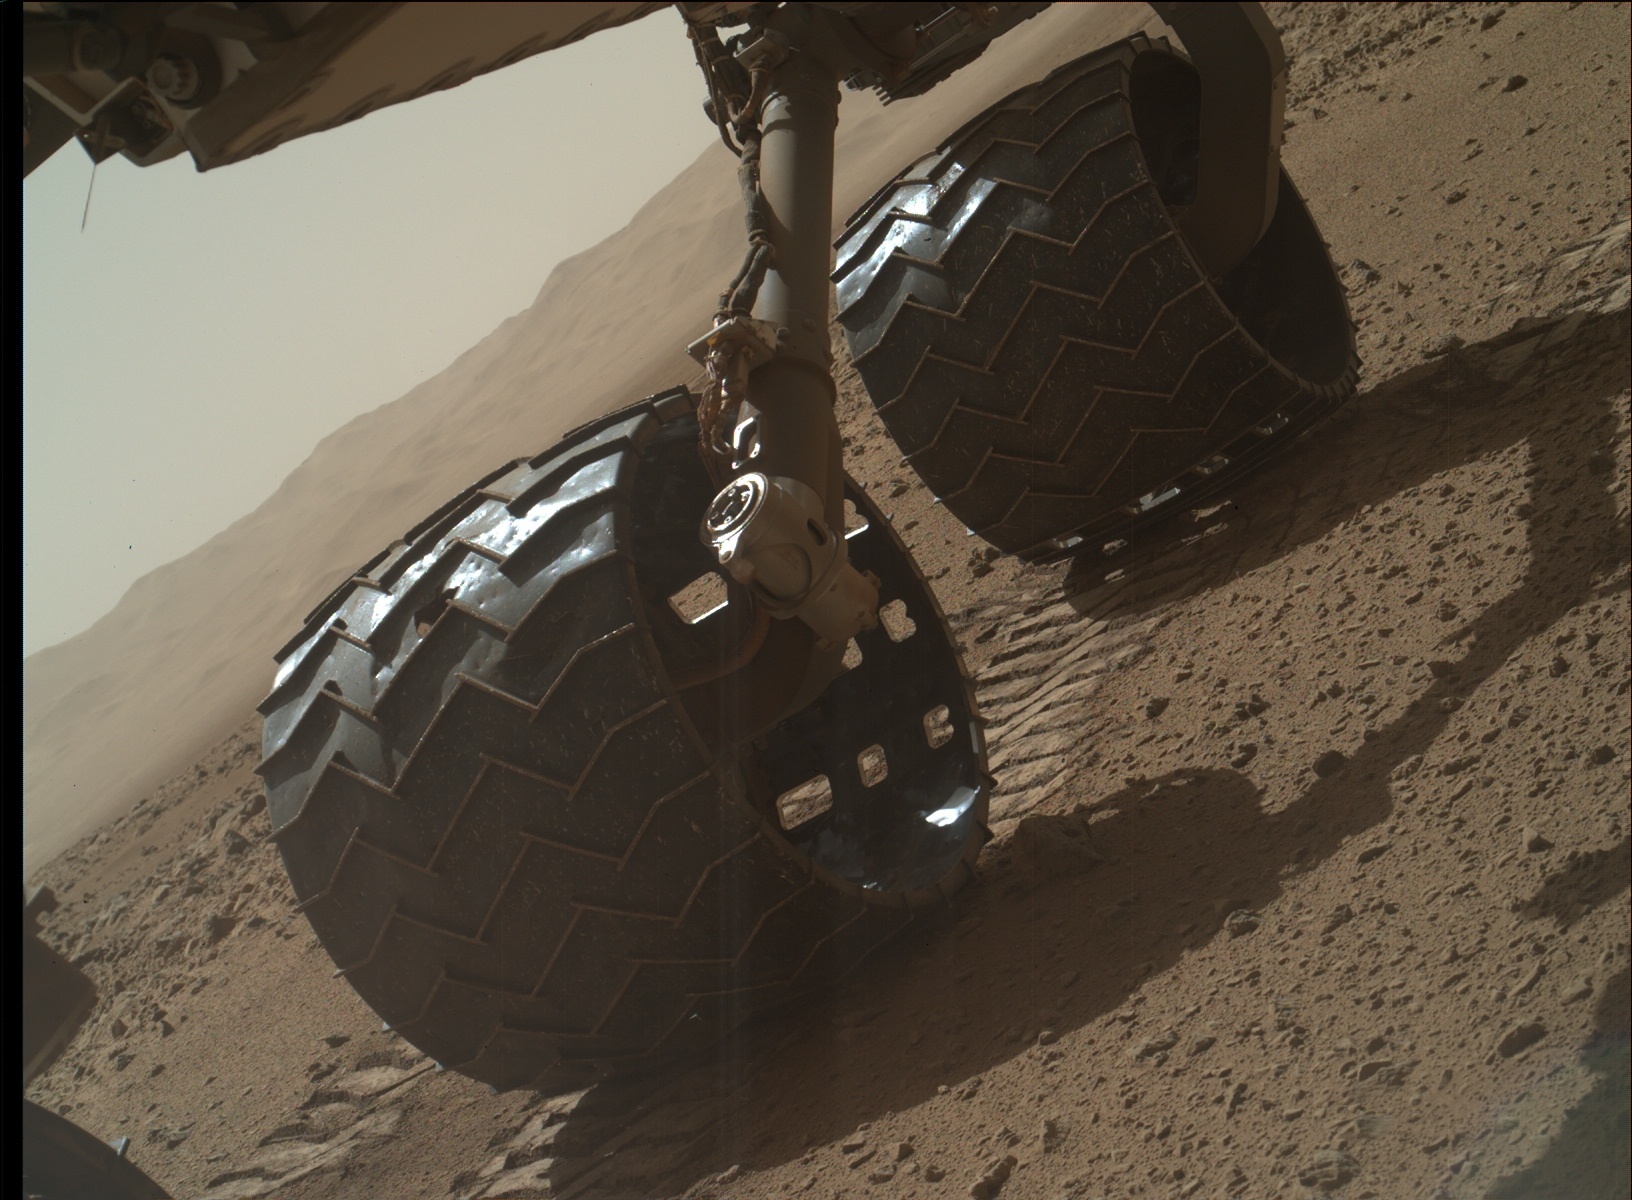 Nasa's Mars rover Curiosity acquired this image using its Mars Hand Lens Imager (MAHLI) on Sol 562